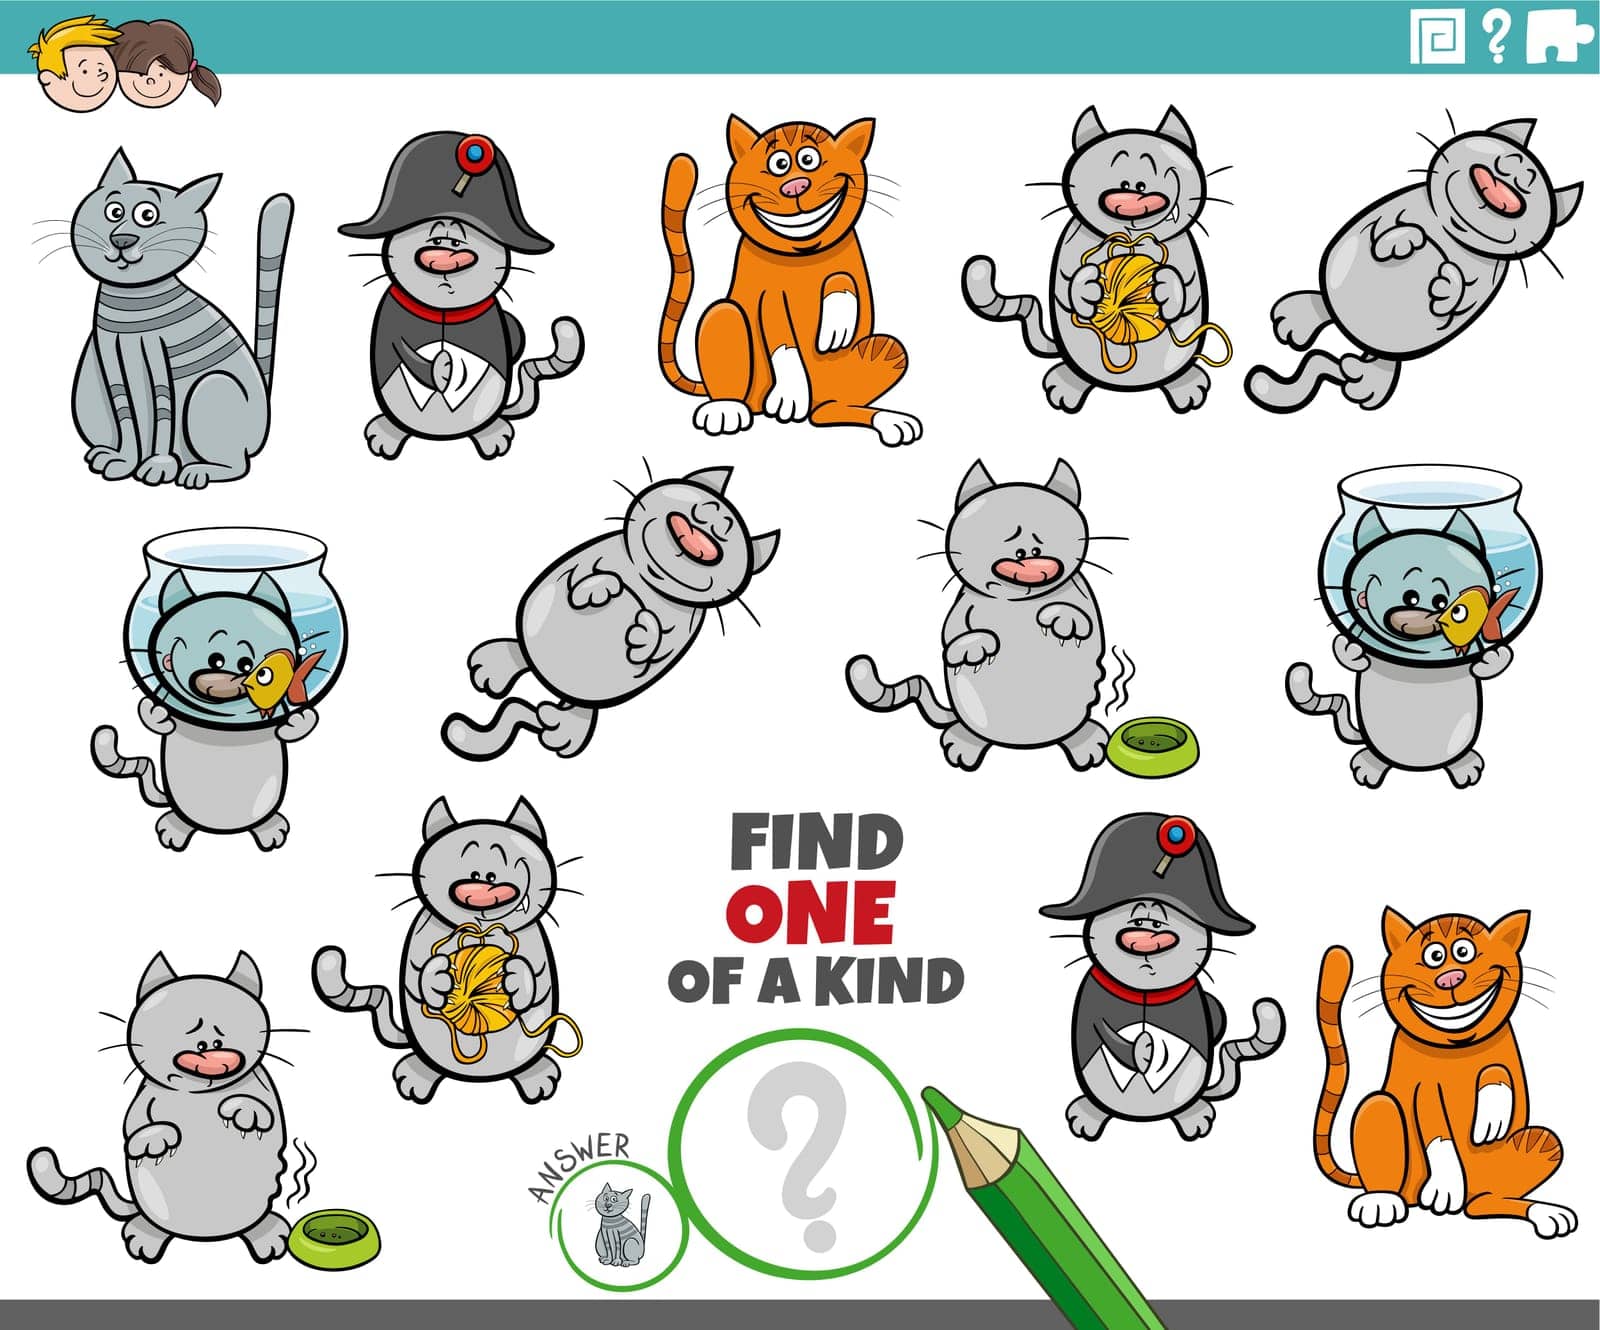 one of a kind game with funny comic cats and kittens by izakowski